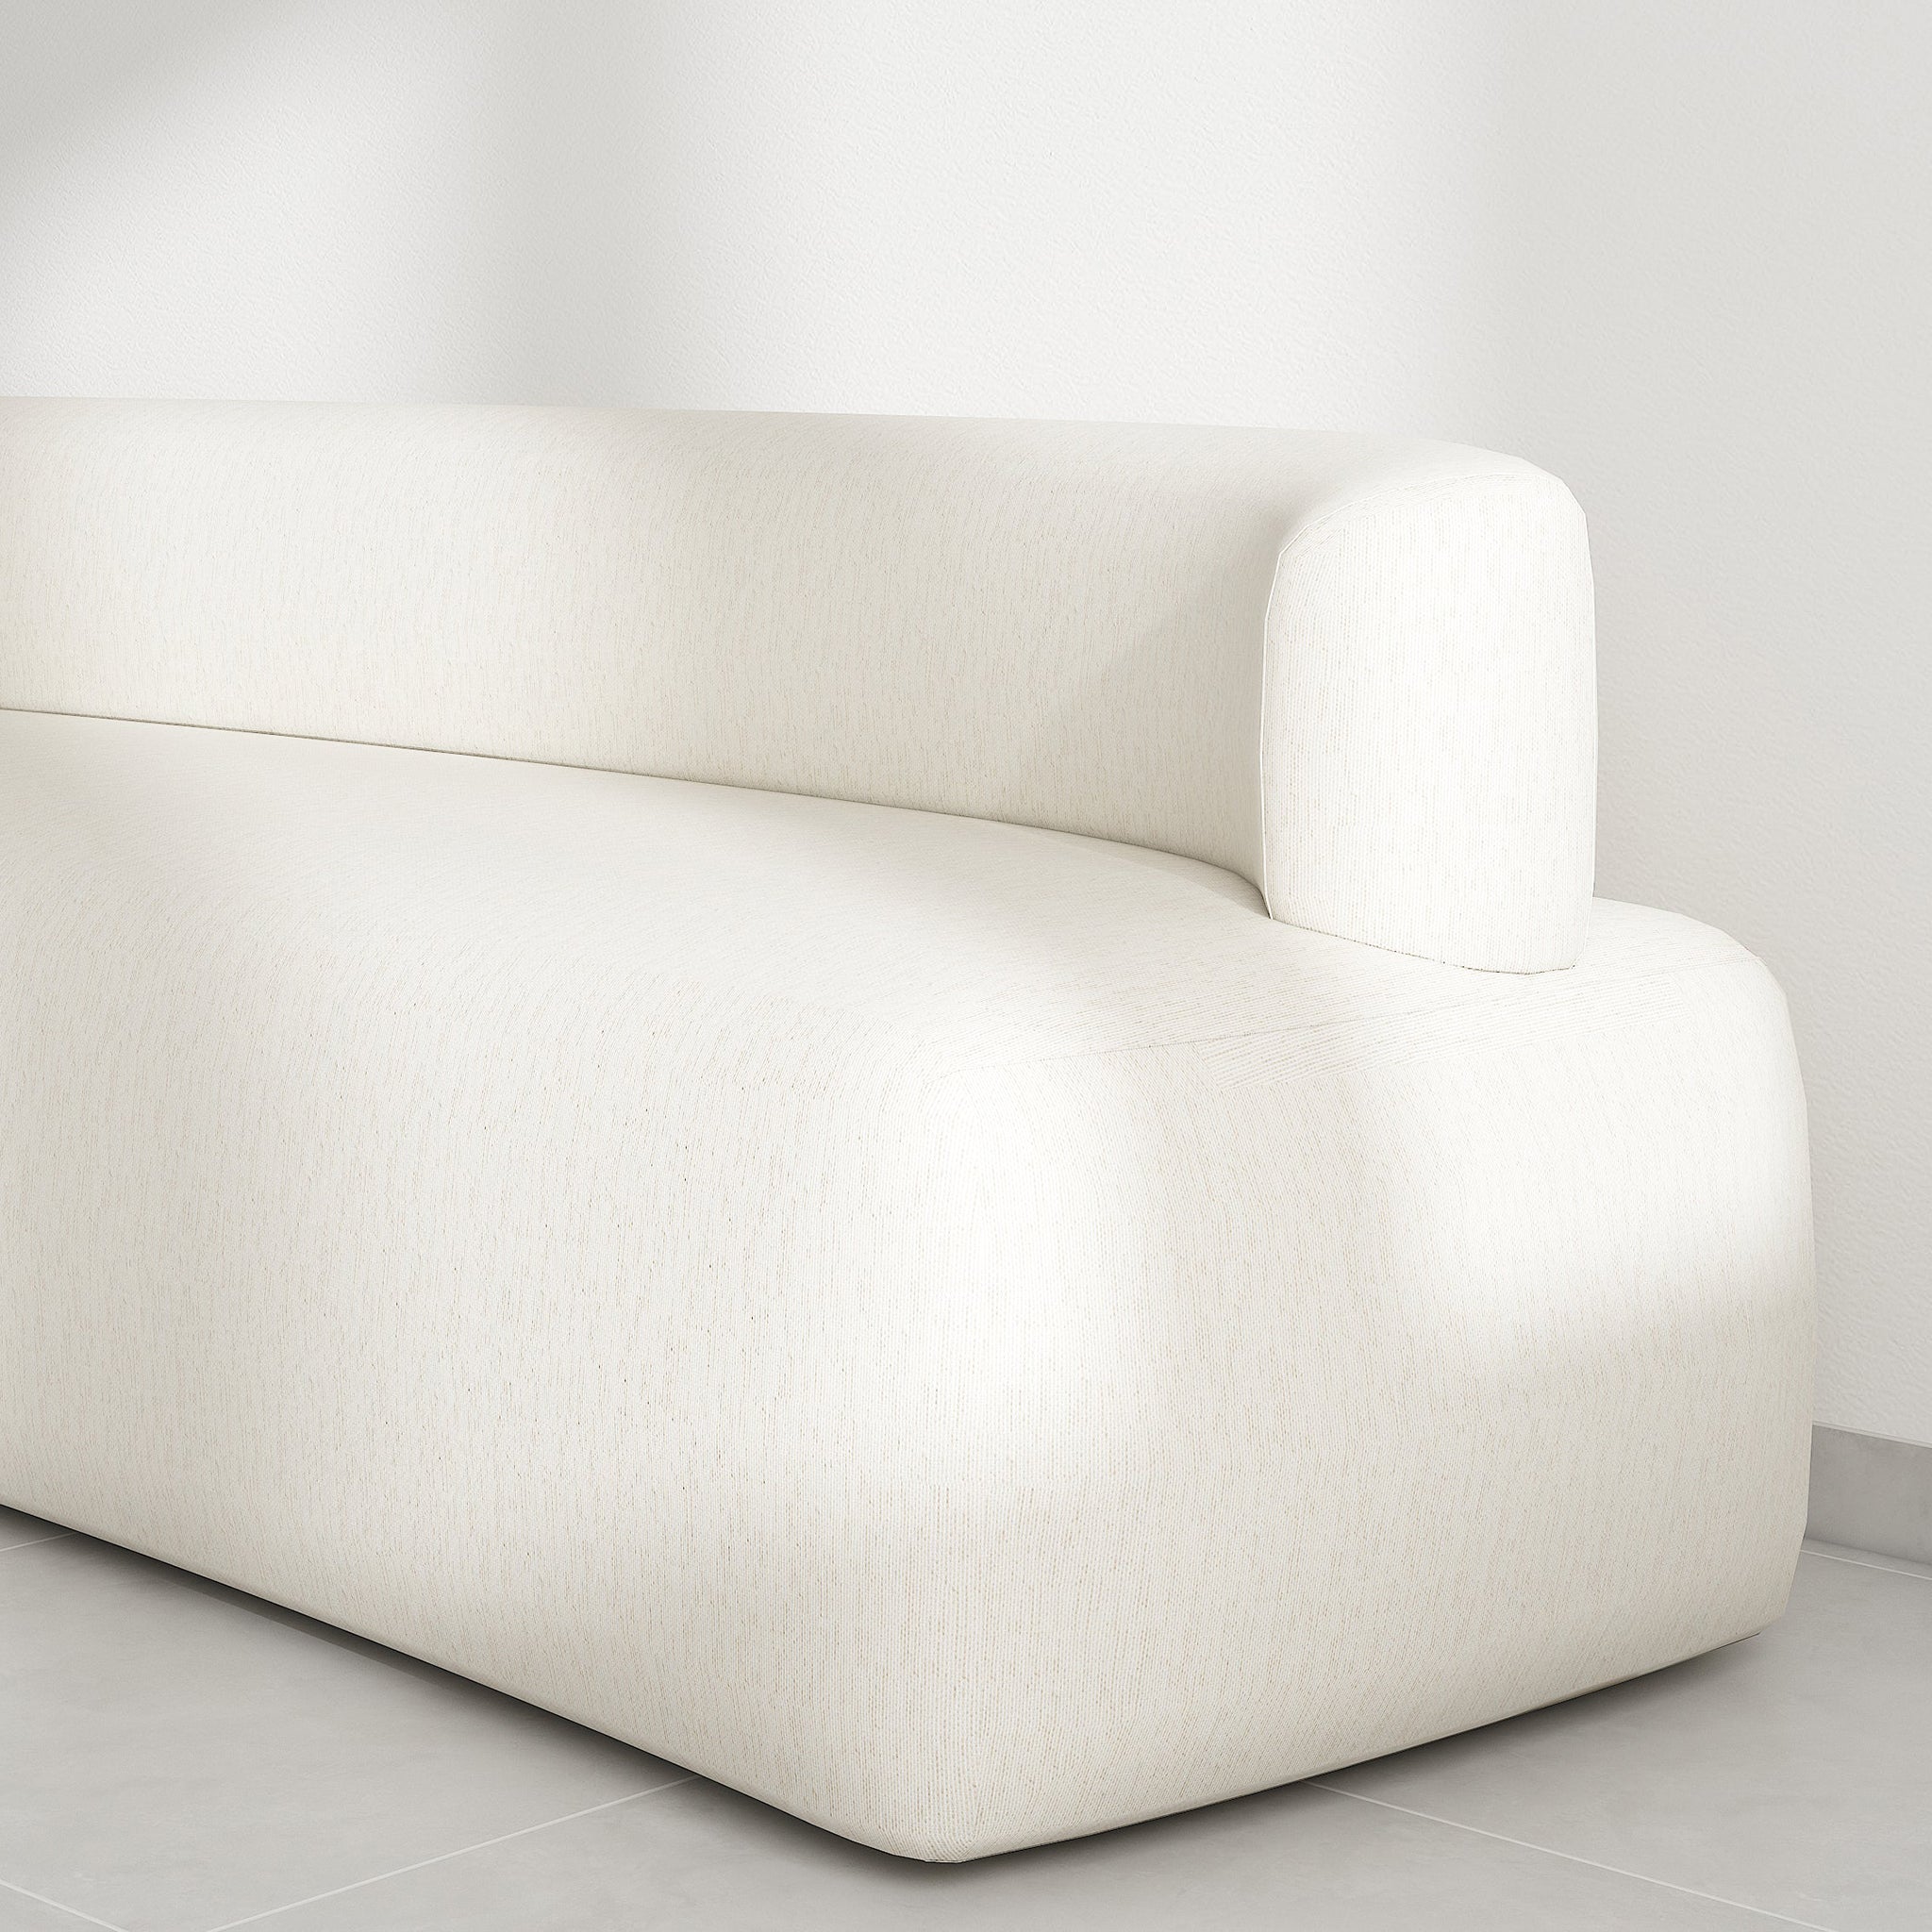 Zoom-in Stylish white sofa featuring a clean, simple silhouette